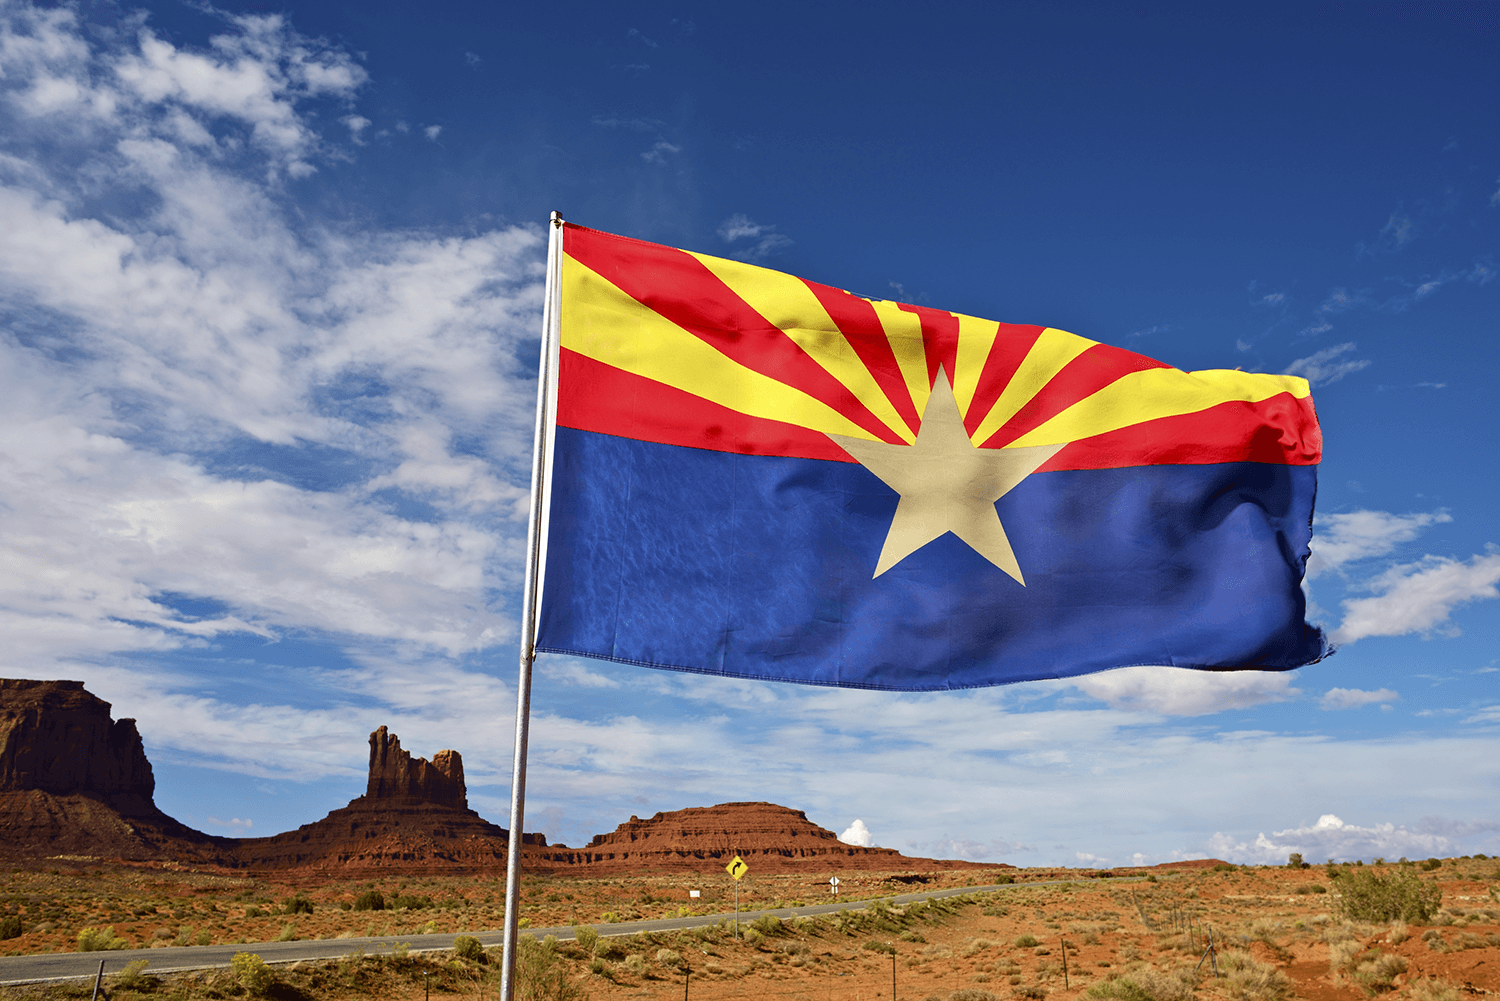 Signed by the Governor: Arizona Legalizes Industrial Hemp with Federal Approval